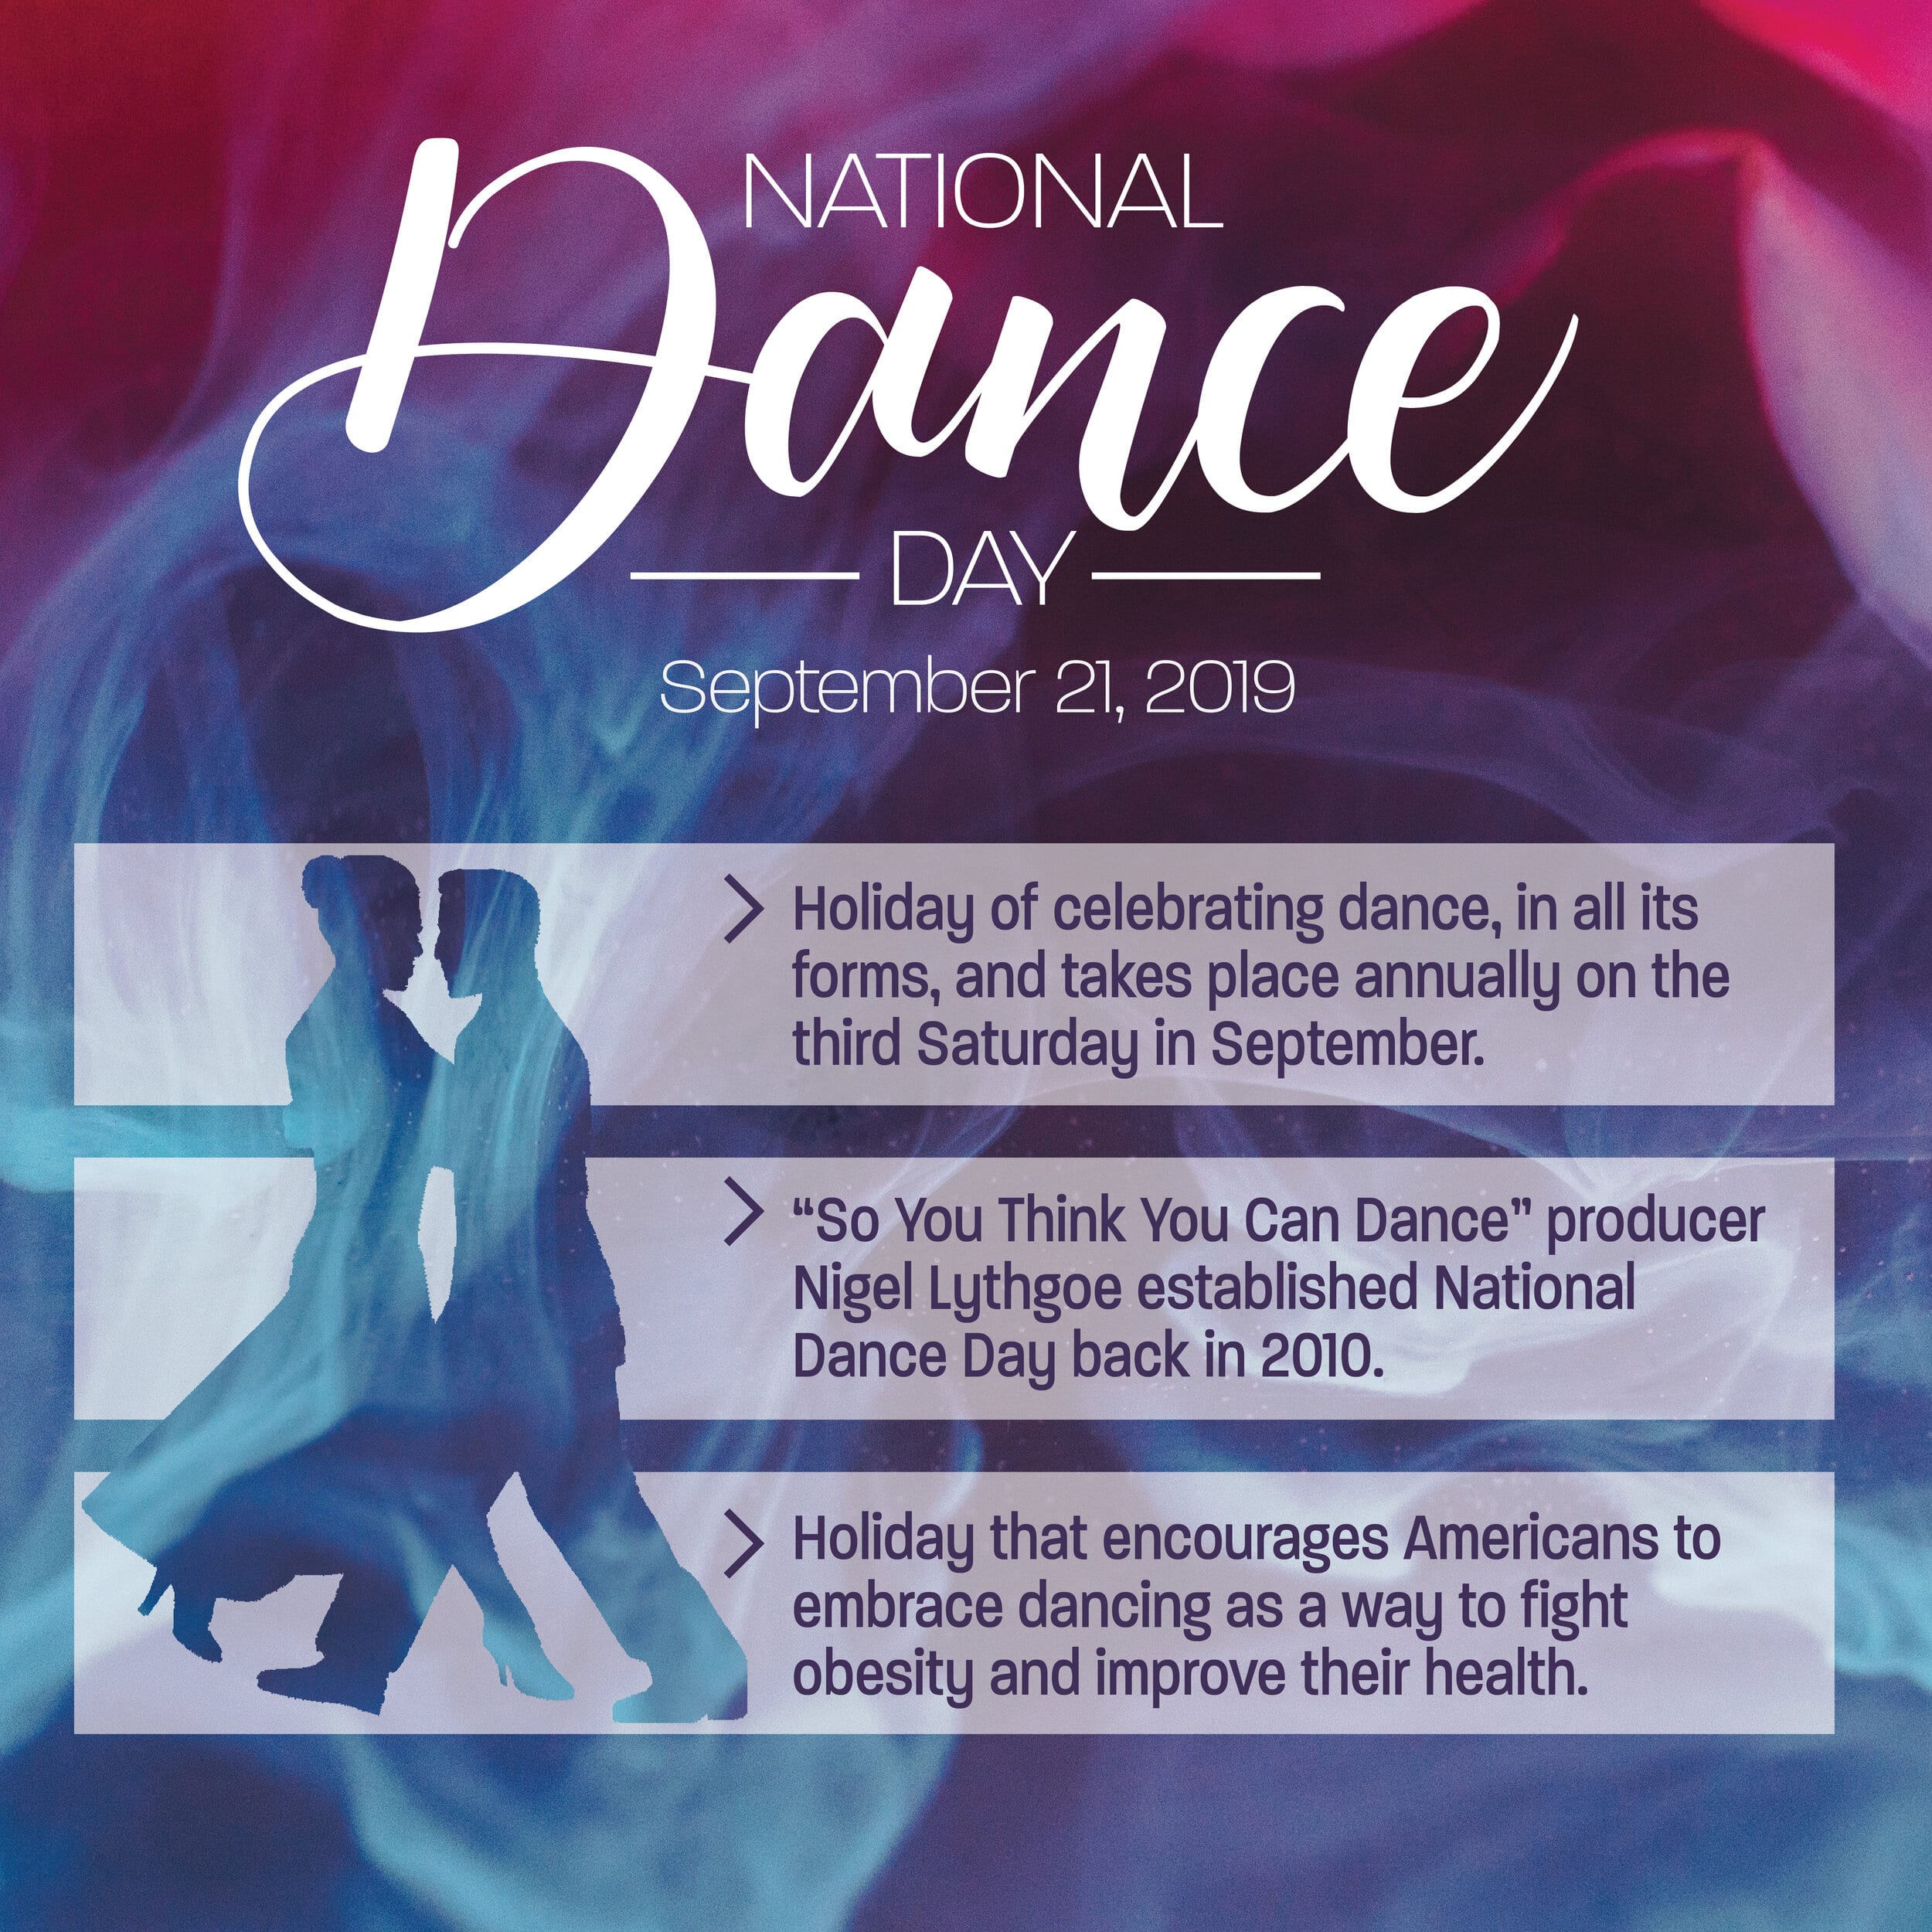 National Dance Day is approaching soon, so check out some history and facts about the holiday!